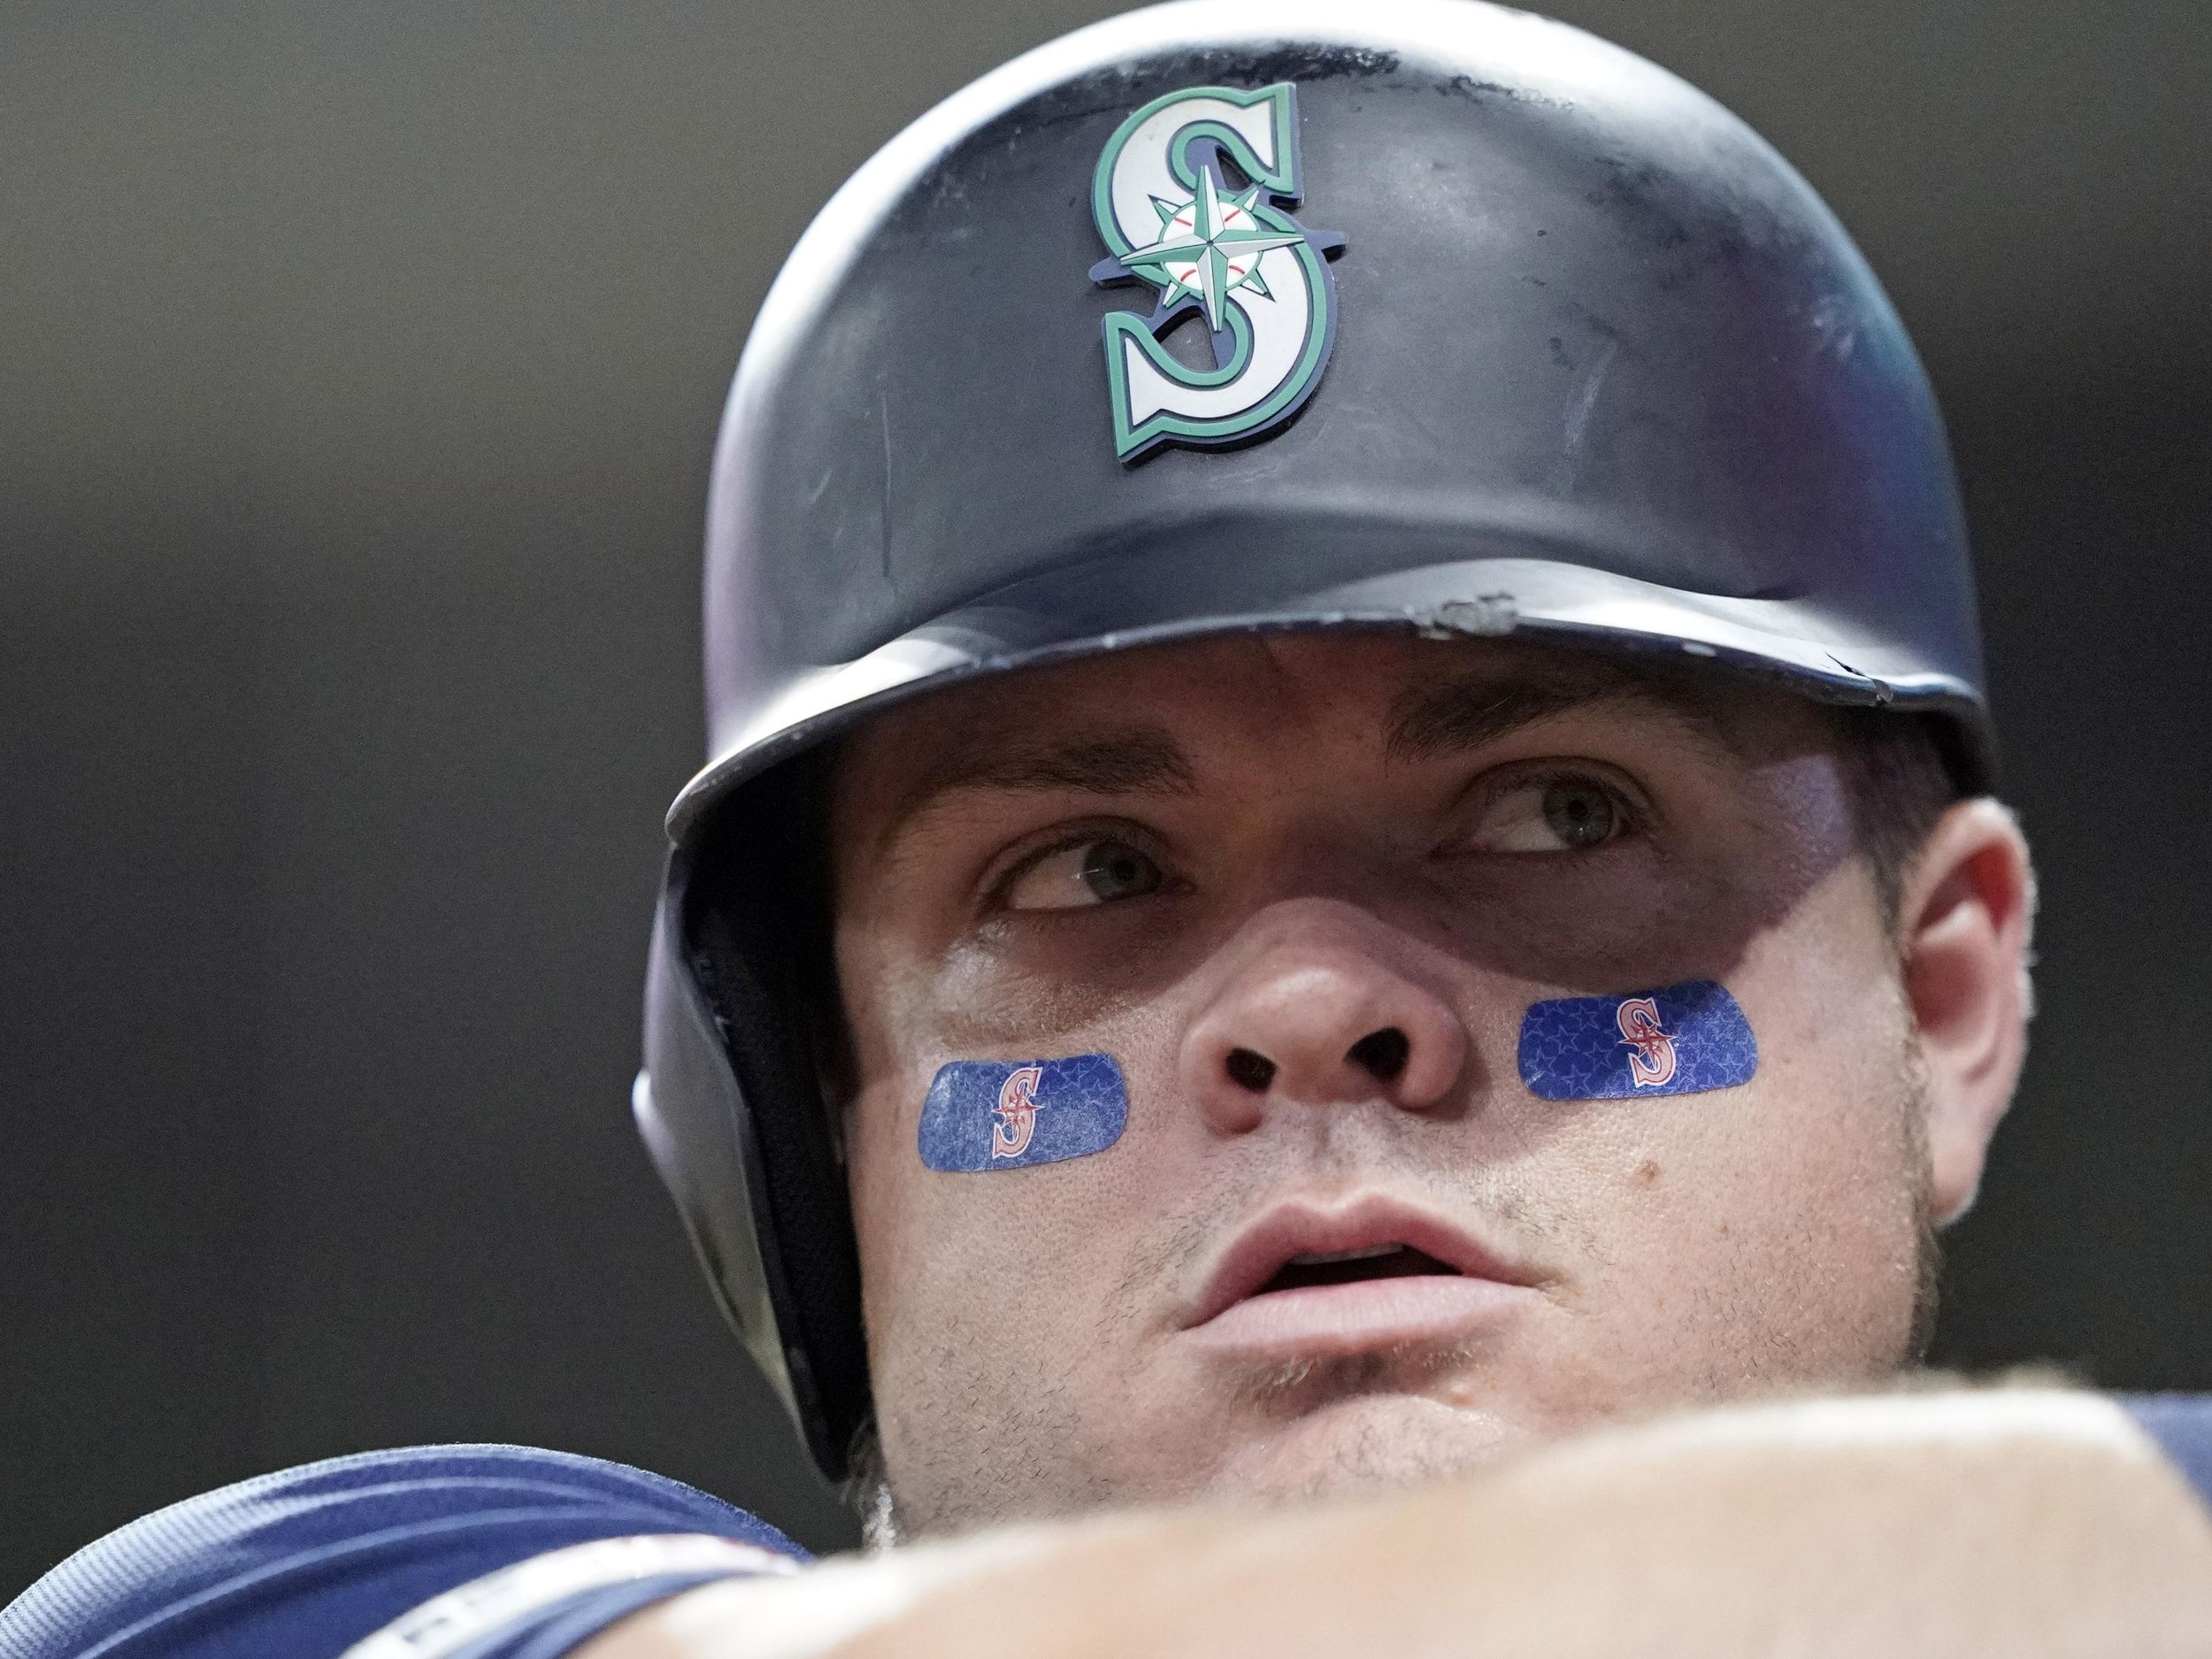 The one and only Daniel Vogelbach is the Mariners All-Star